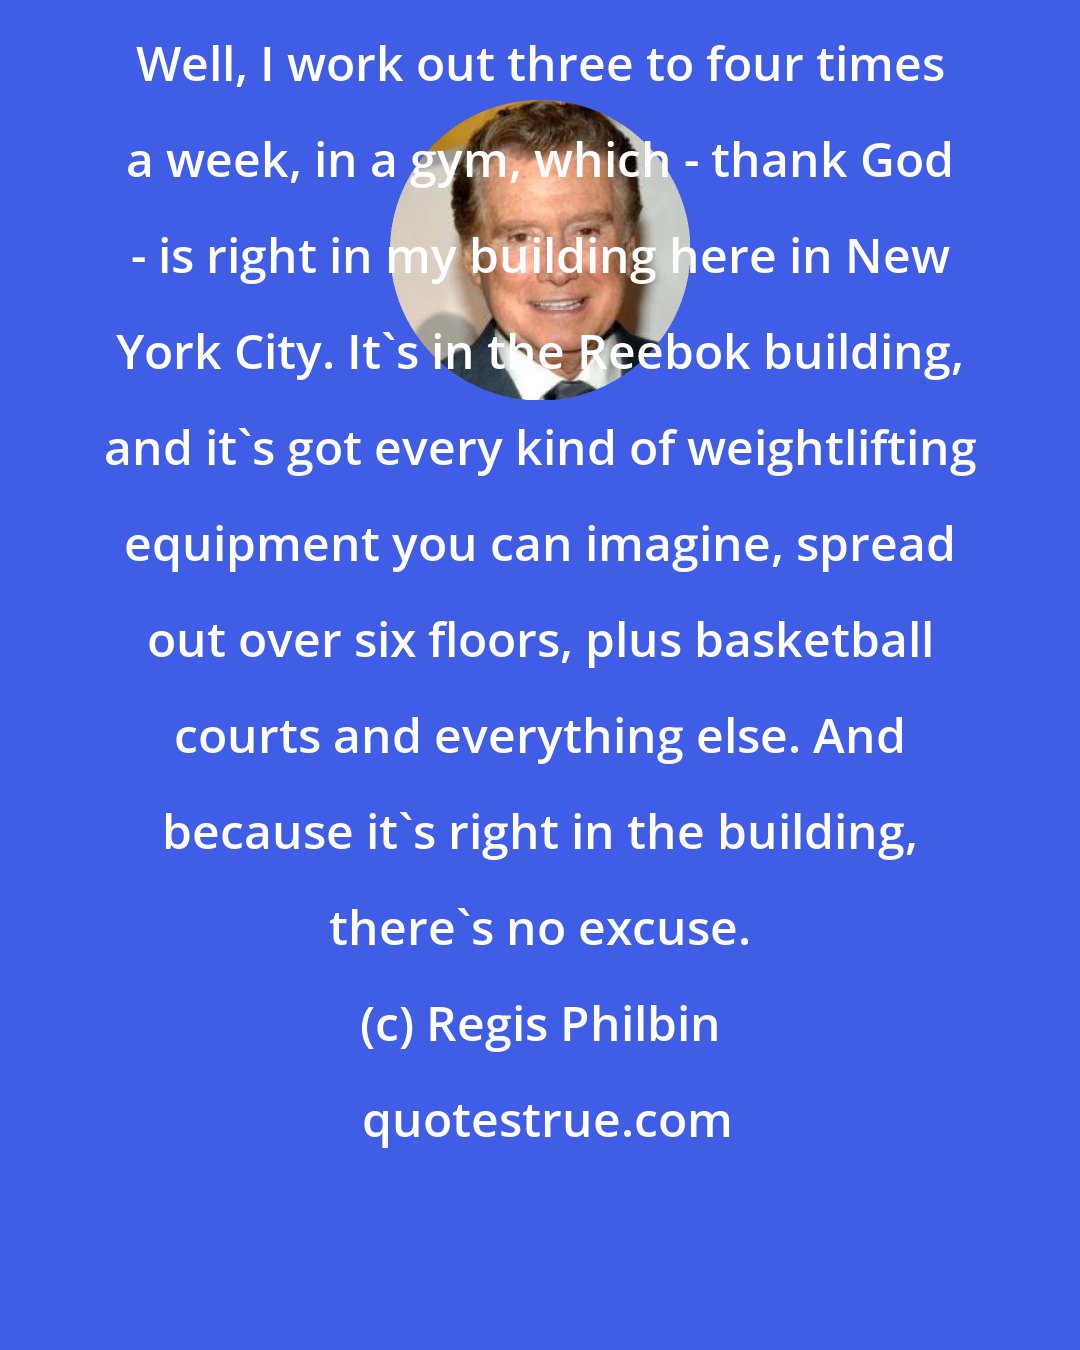 Regis Philbin: Well, I work out three to four times a week, in a gym, which - thank God - is right in my building here in New York City. It's in the Reebok building, and it's got every kind of weightlifting equipment you can imagine, spread out over six floors, plus basketball courts and everything else. And because it's right in the building, there's no excuse.